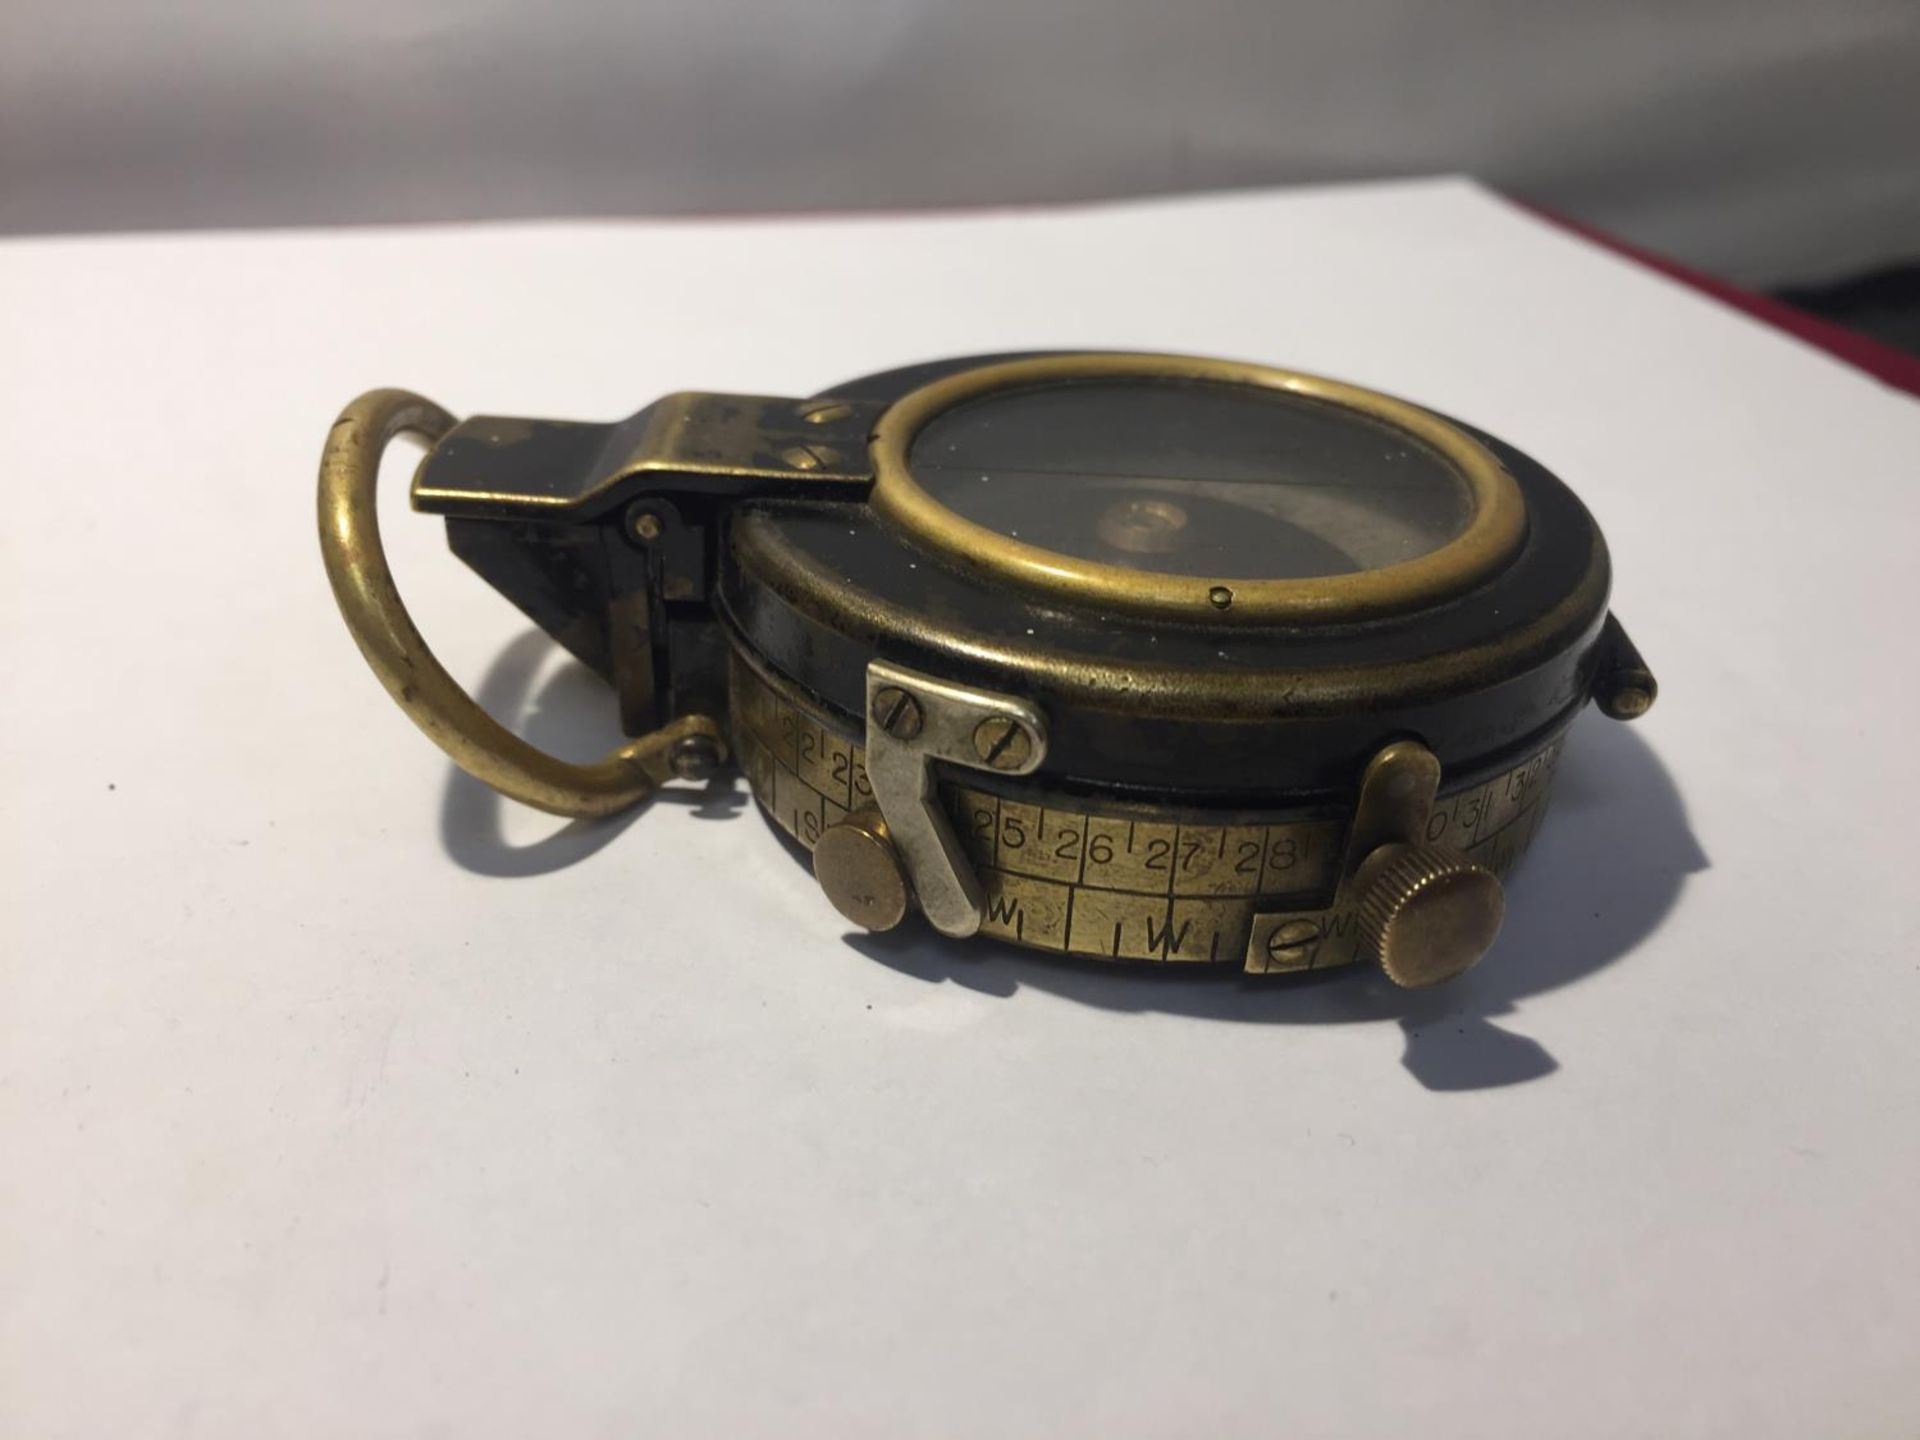 A MILITARY COMPASS DATED 1917 - Image 4 of 5